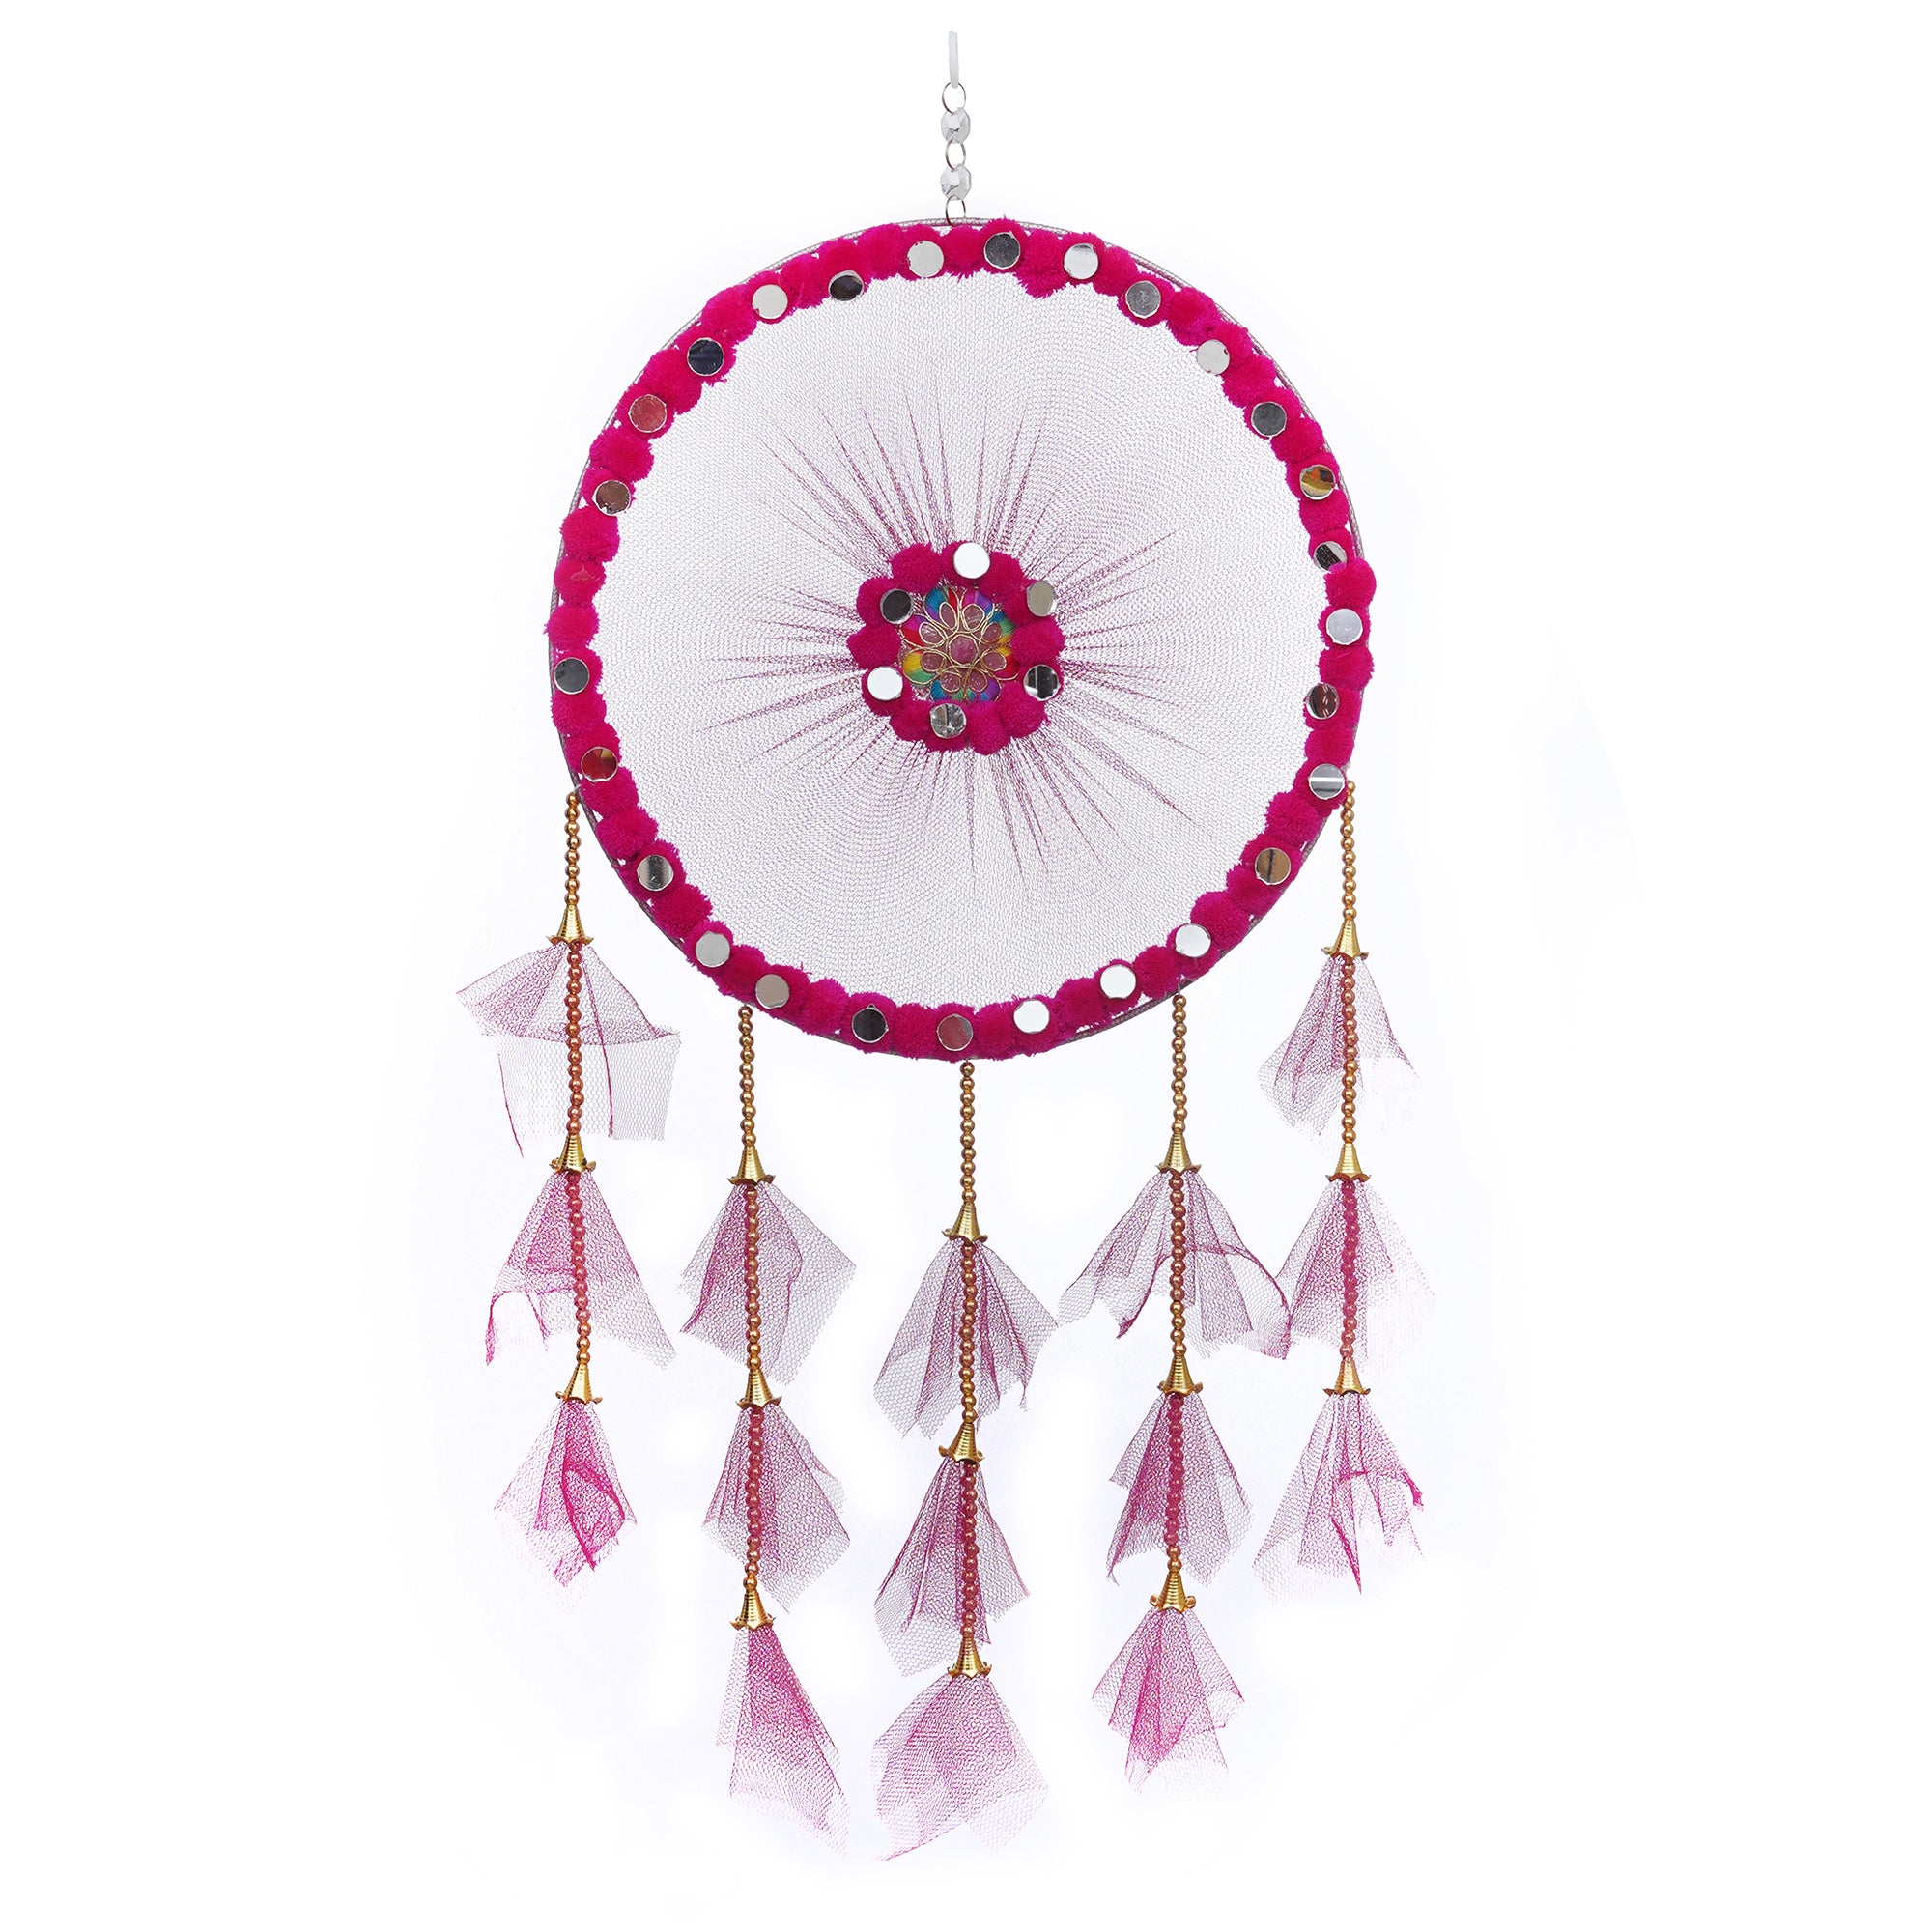 eCraftIndia Pink Wall Hanging Dream Catcher For Home Decor - Perfect Window, Bedroom, Living Room, Wall Decoration Item 2